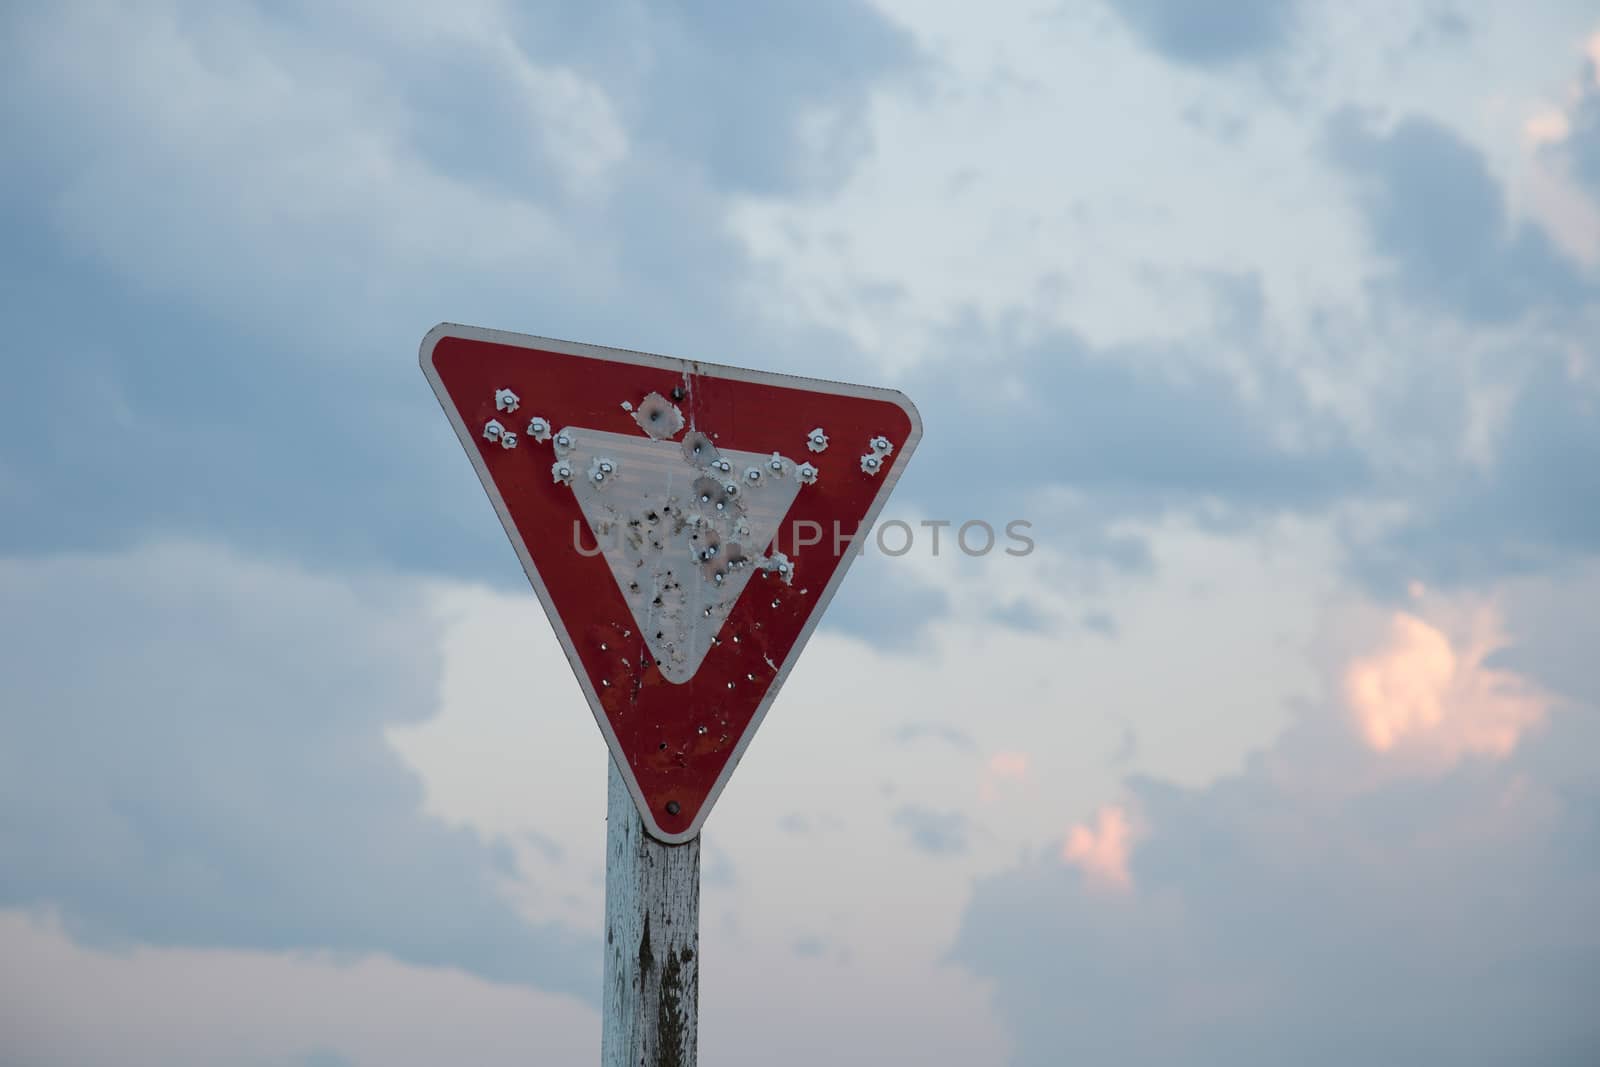 Yield Sign with Bullet Holes by rjamphoto